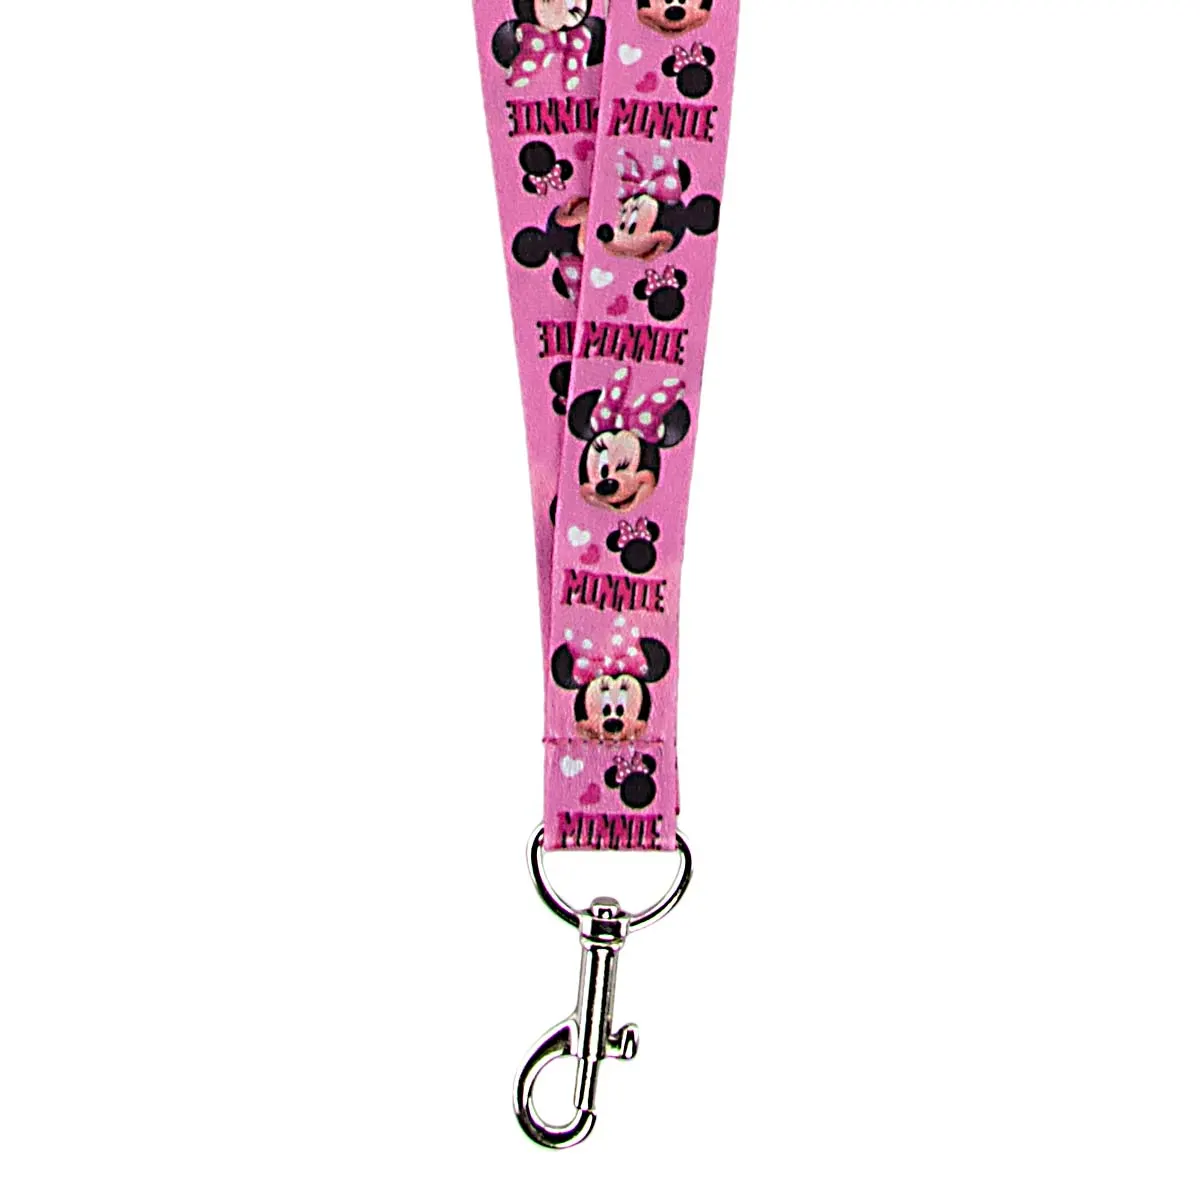 NEW Disney Minnie Mouse Lanyard Keychain pink 19.5 inches long w/ metal ... - $5.95